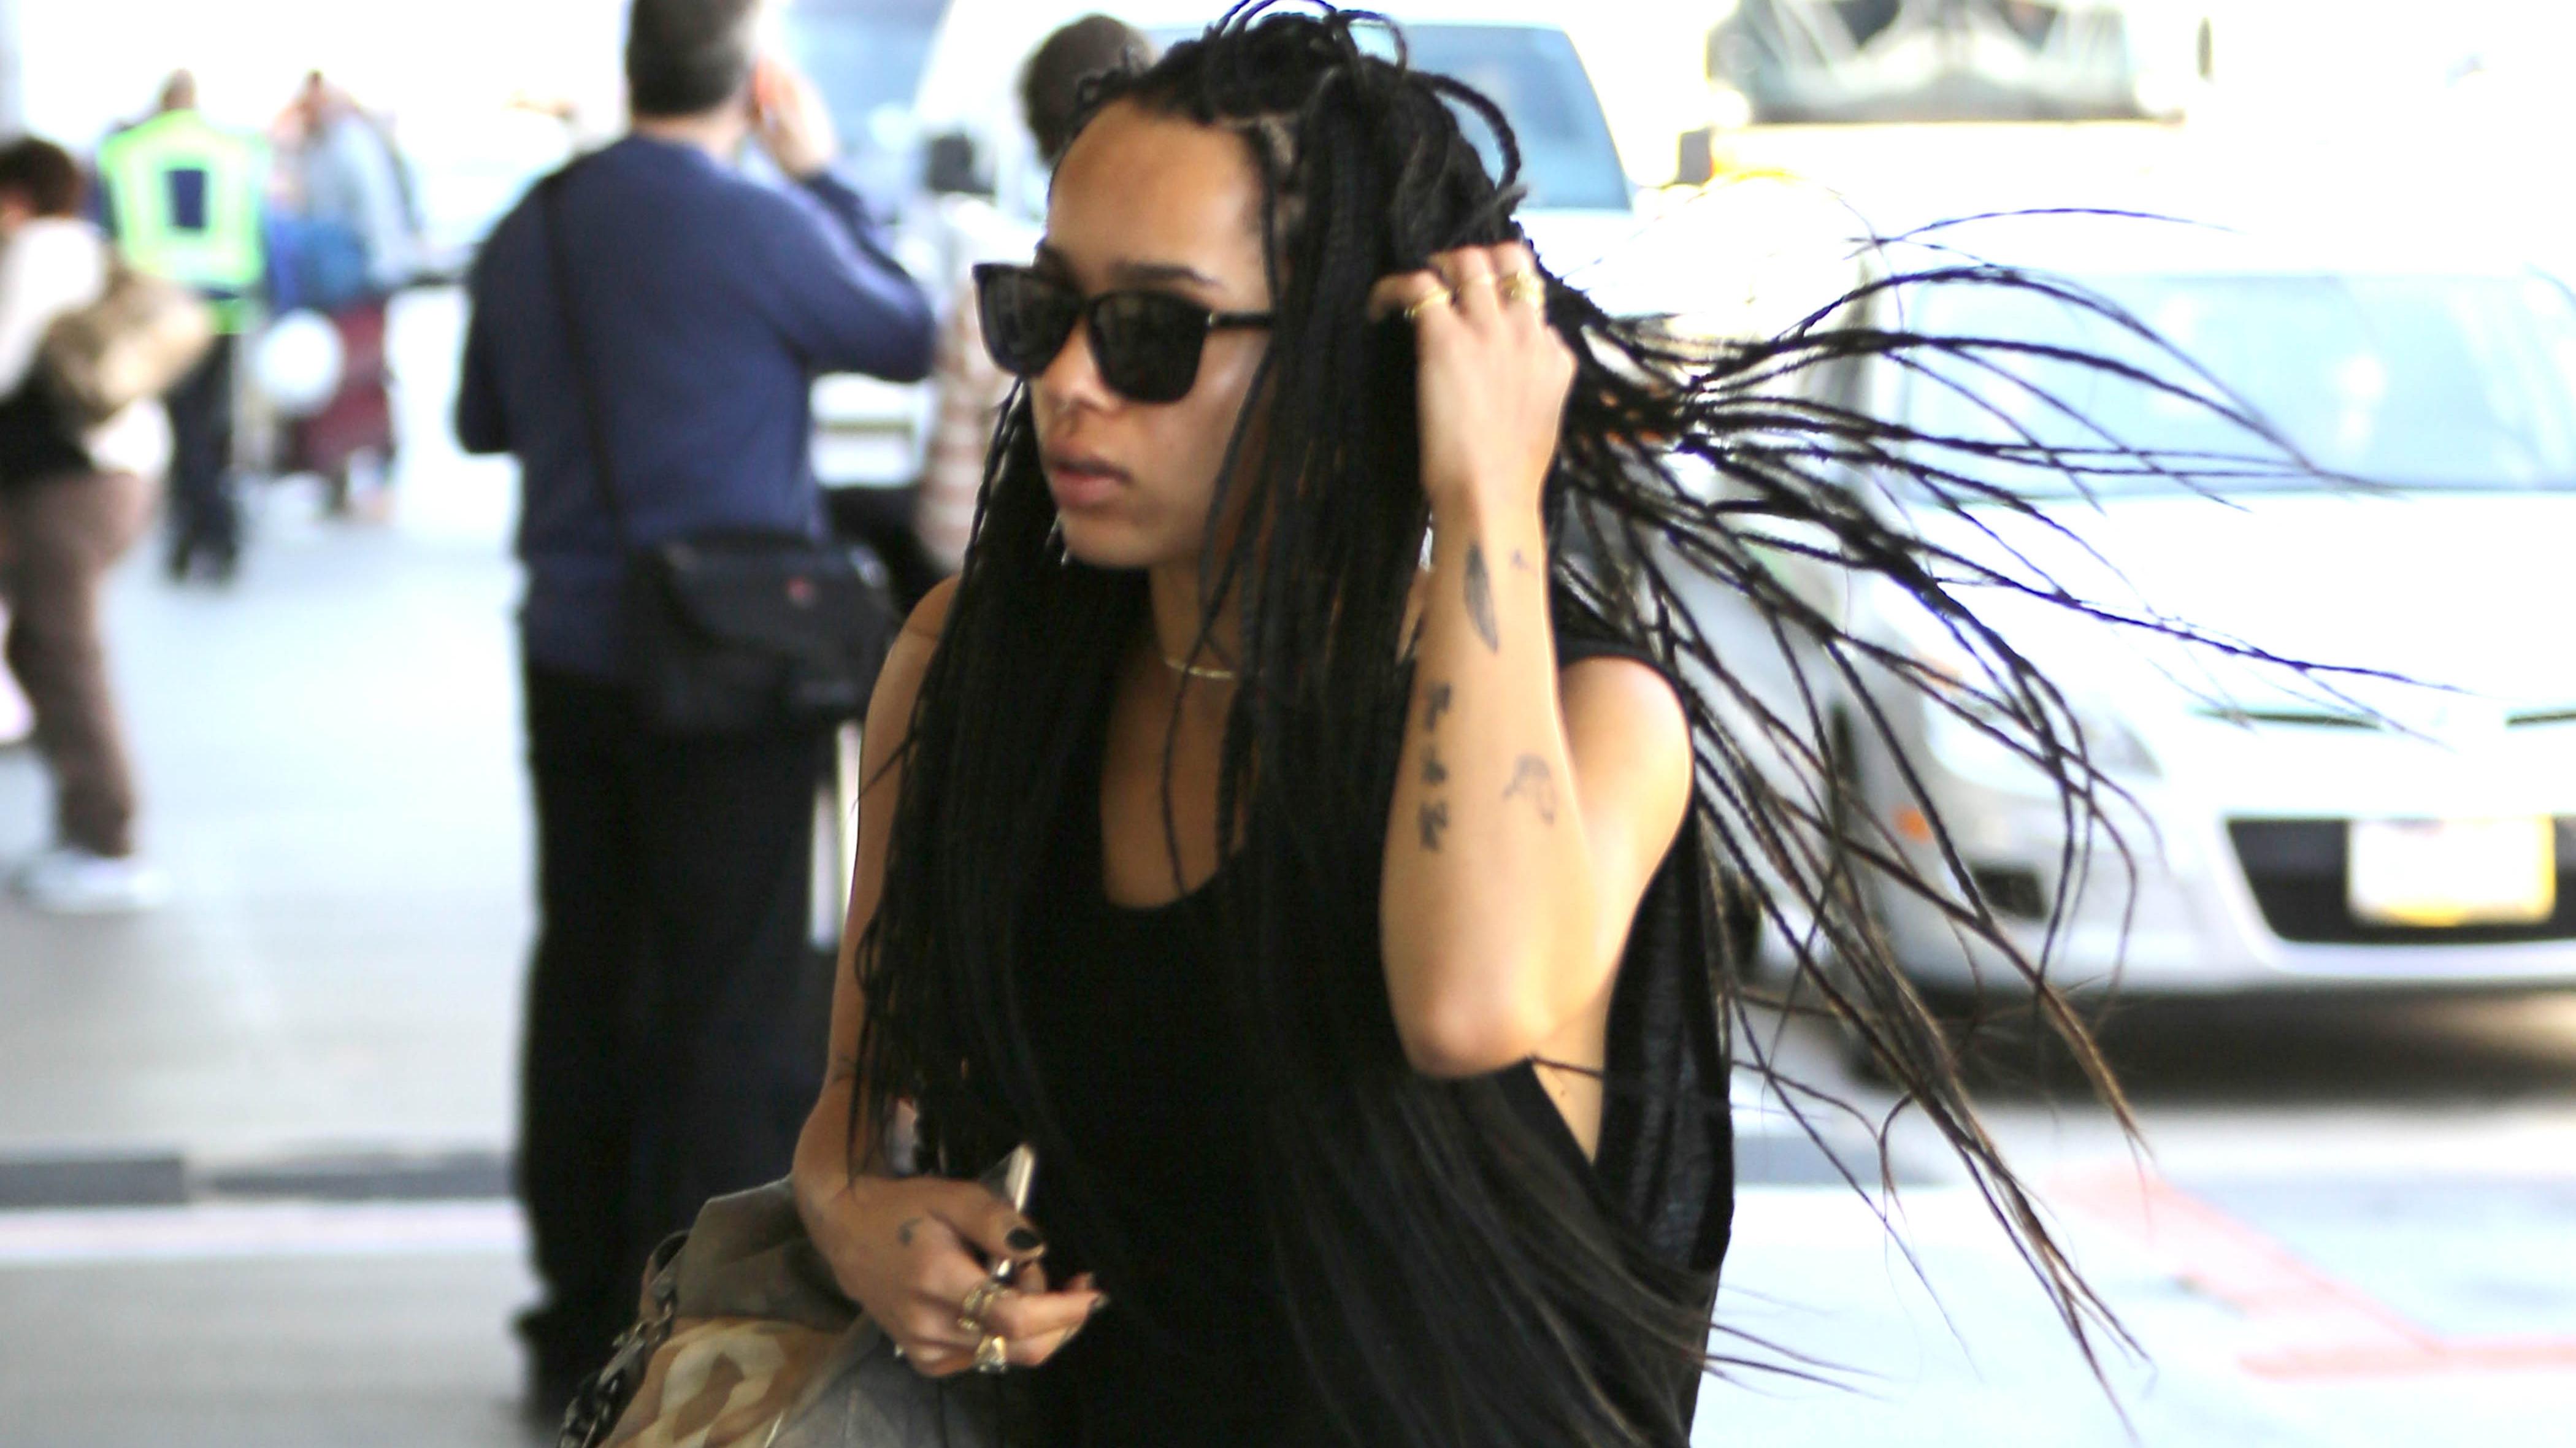 Zoe Kravitz shows that dreadlocks can be sexy as she wears a fur coat &amp; boots as she catches a flight out of Los Angeles.